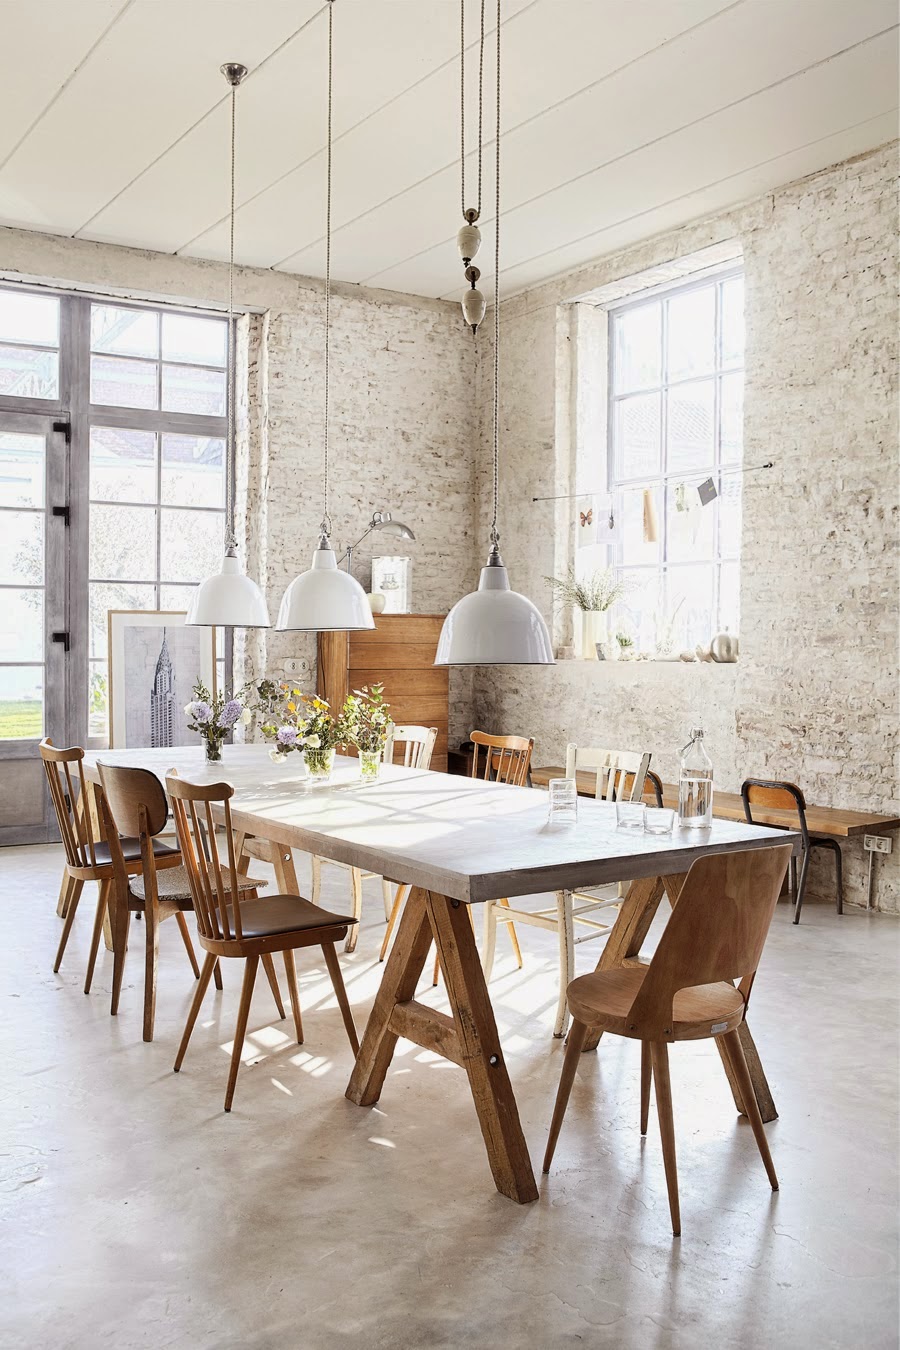 Bright dining room with mismatched chairs